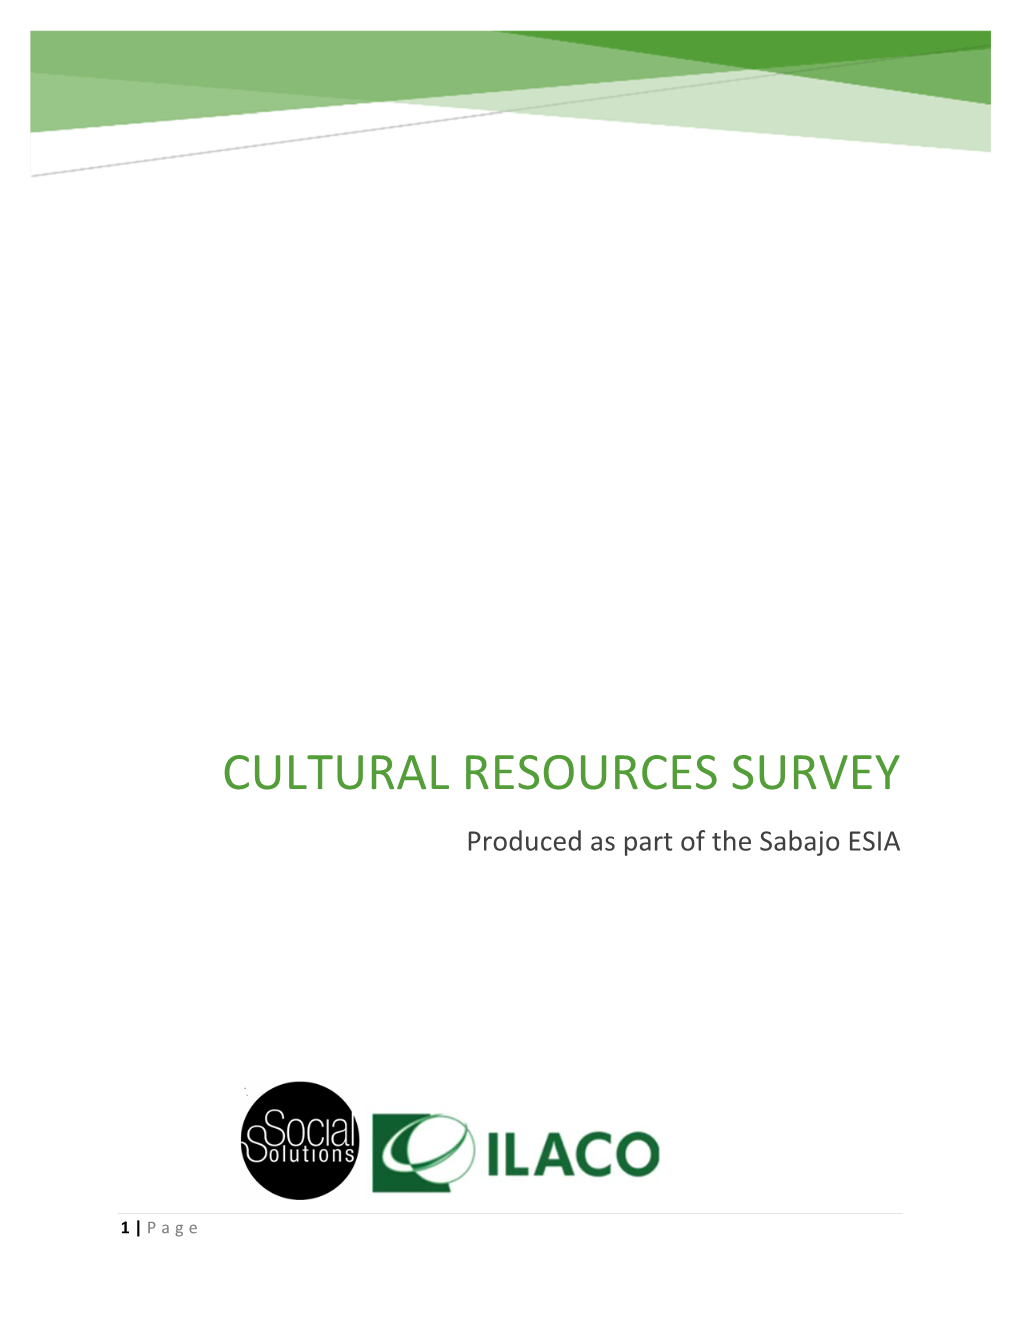 CULTURAL RESOURCES SURVEY Produced As Part of the Sabajo ESIA